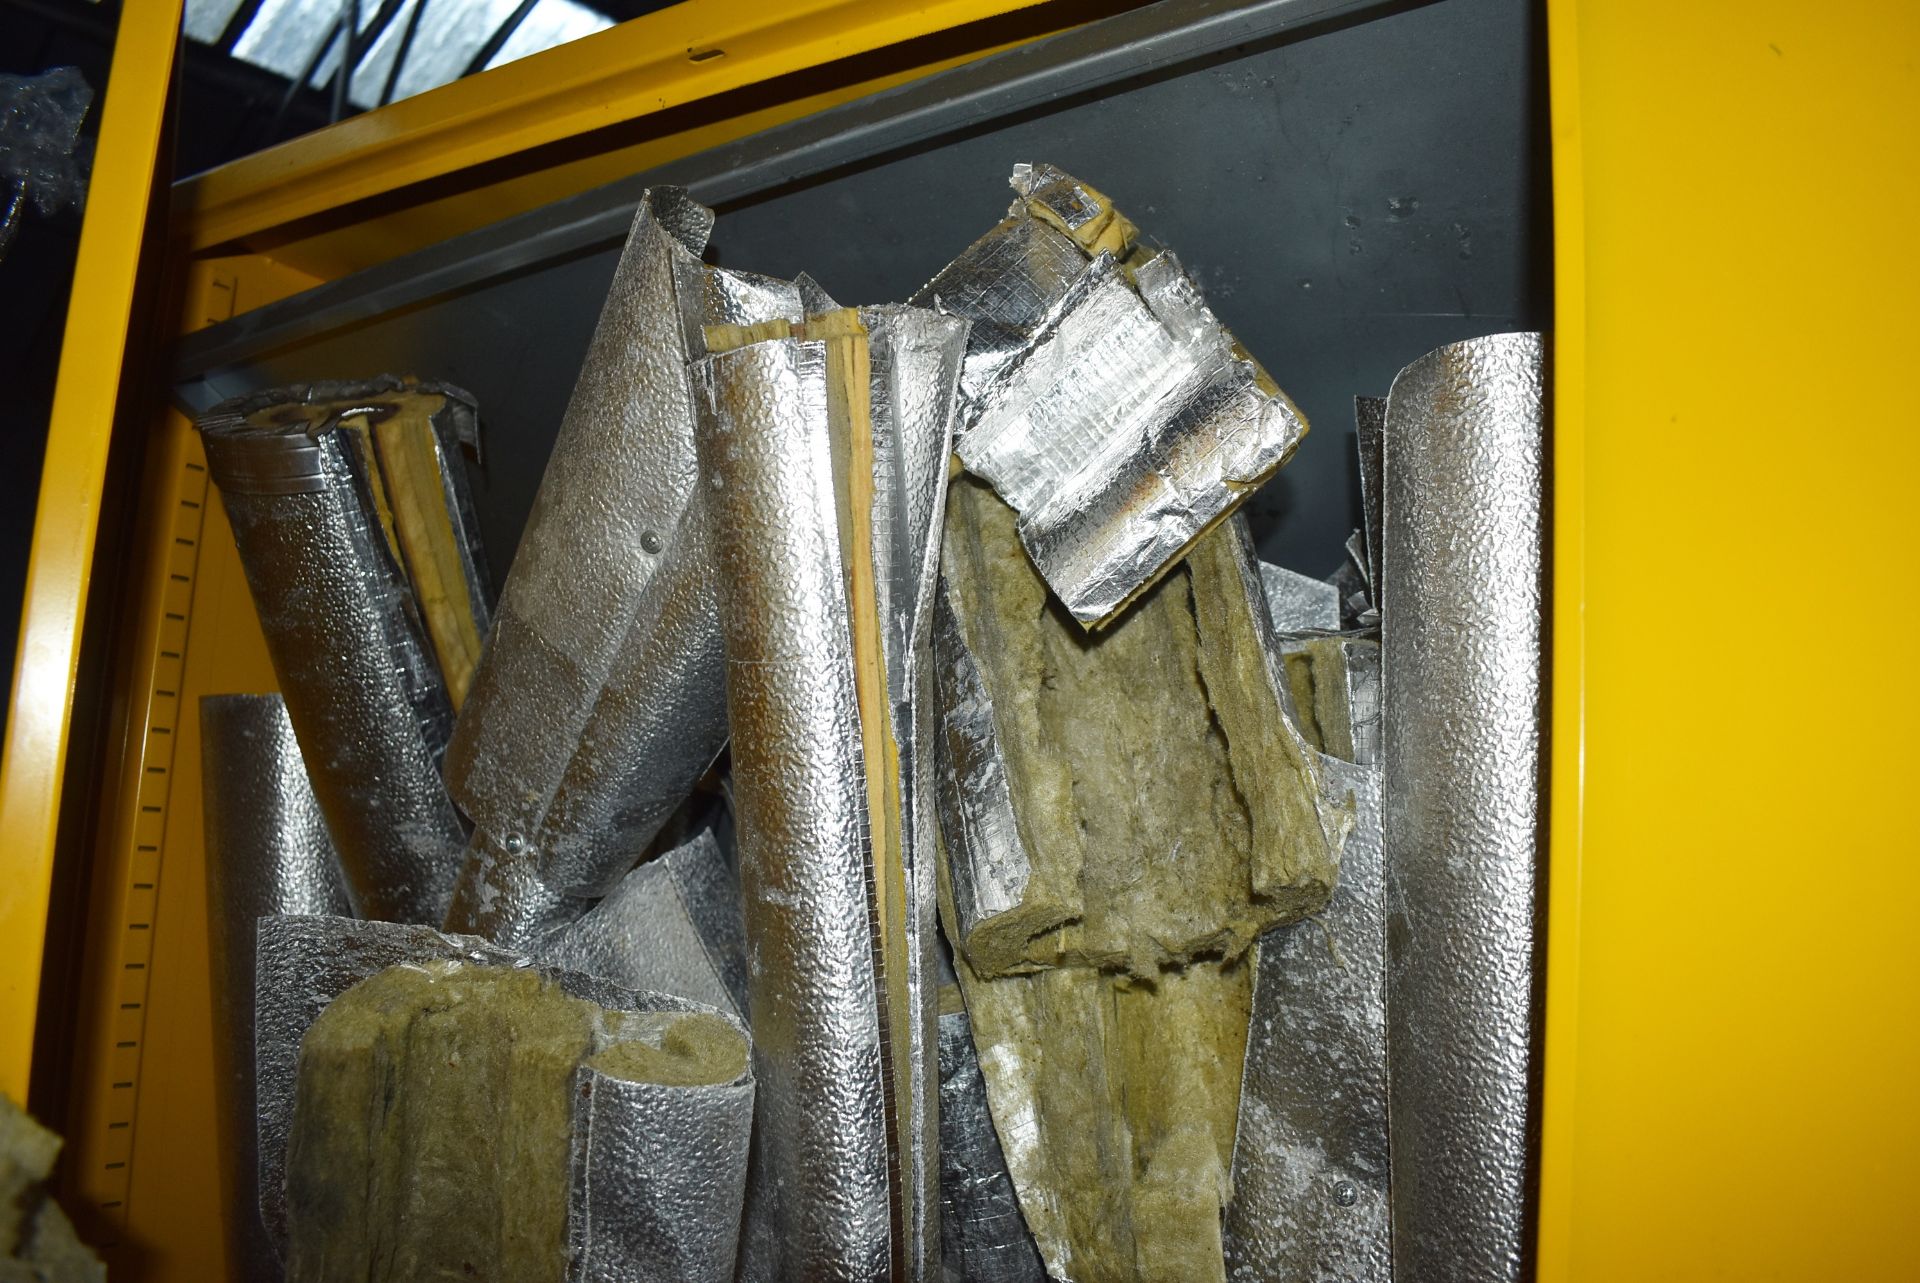 Large Quantity of Thermal Pipe Covering Contents of Two Upright Cabinets - Cabinets Not Included - - Image 5 of 10